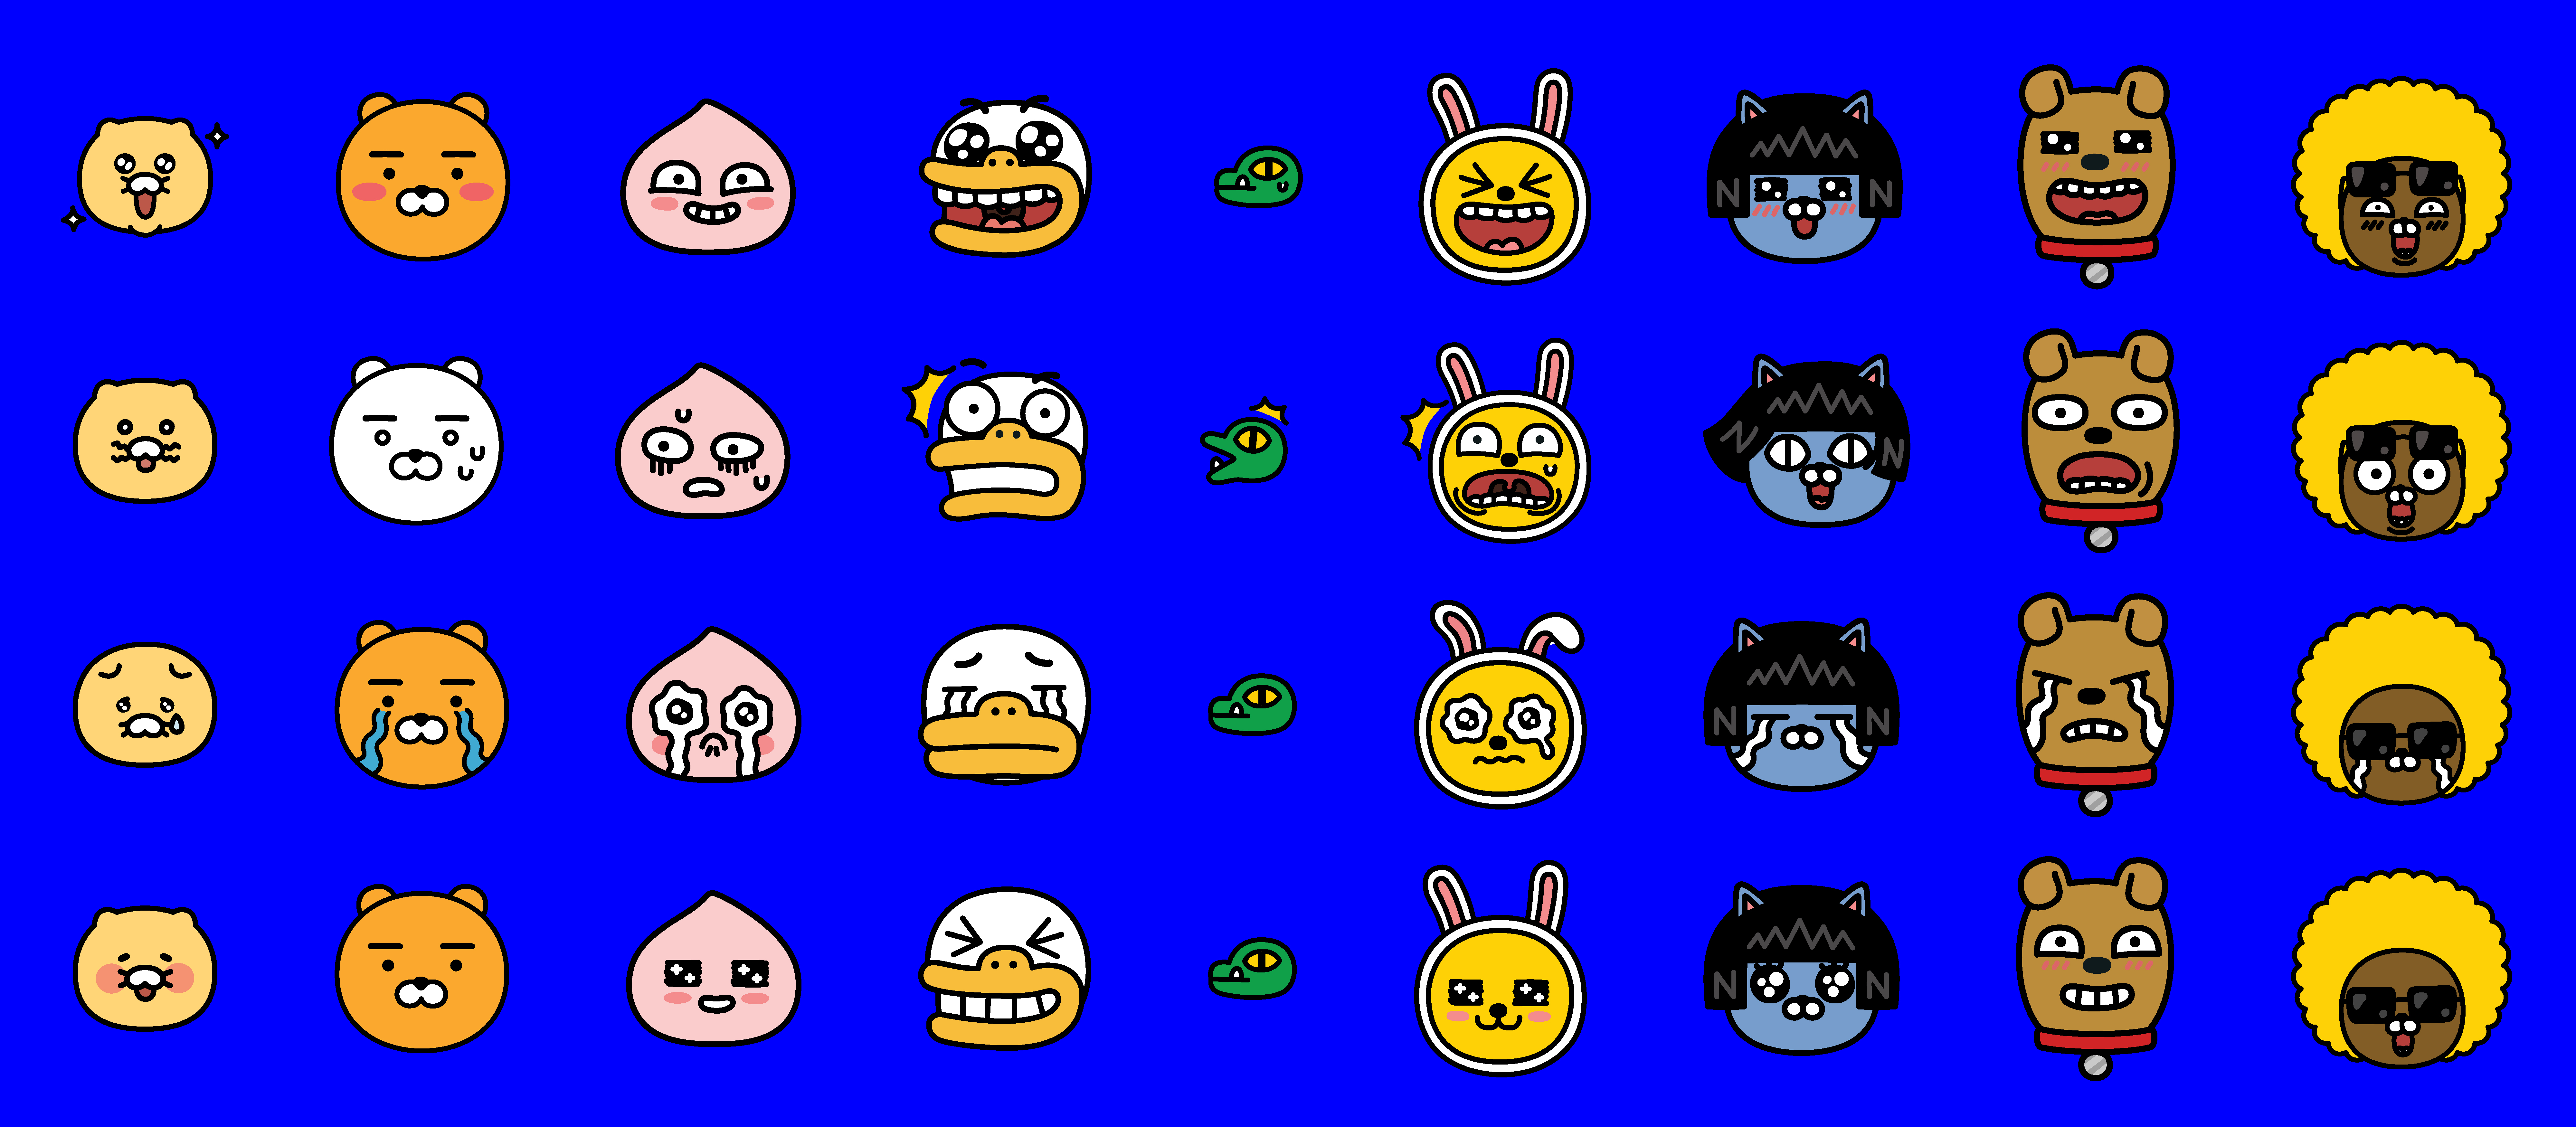 5-4_all_kakao_friends_facial_expressions_of_joy_and_sorrow.jpg